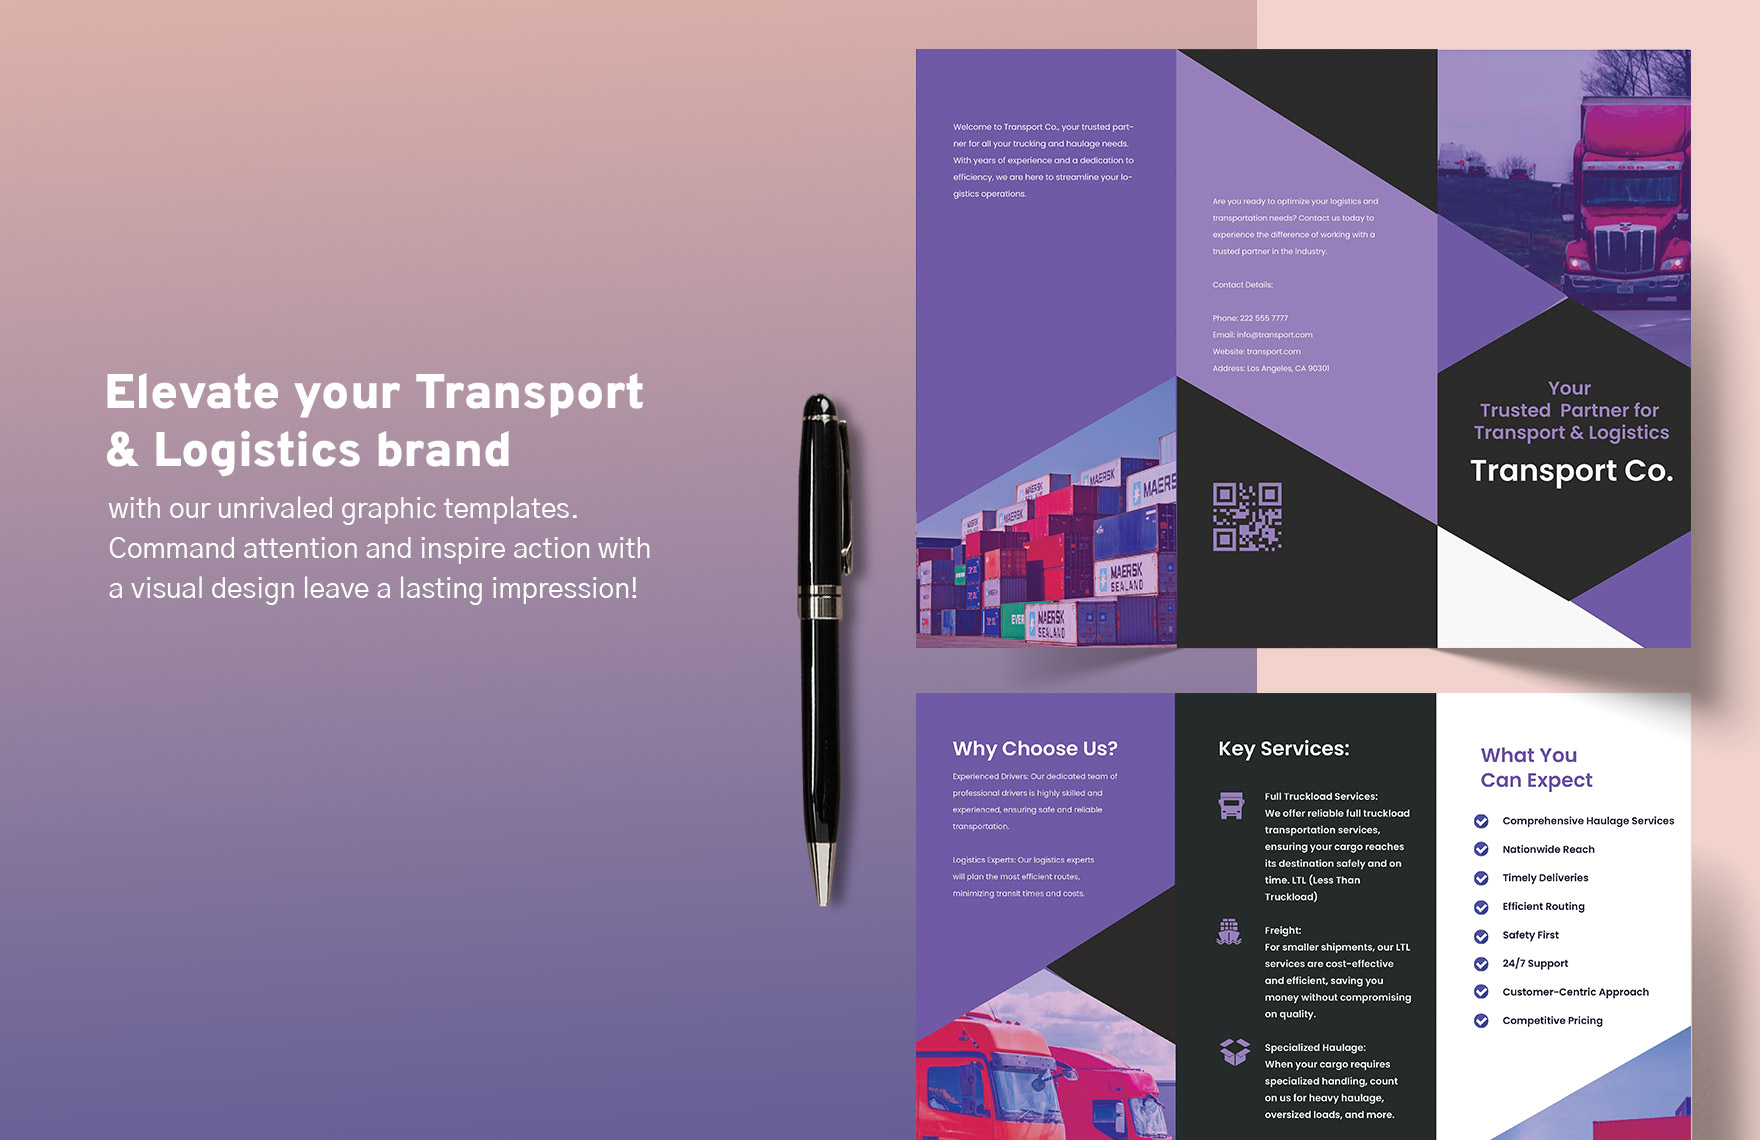 Transport and Logistics Trucking and Haulage Brochure Template